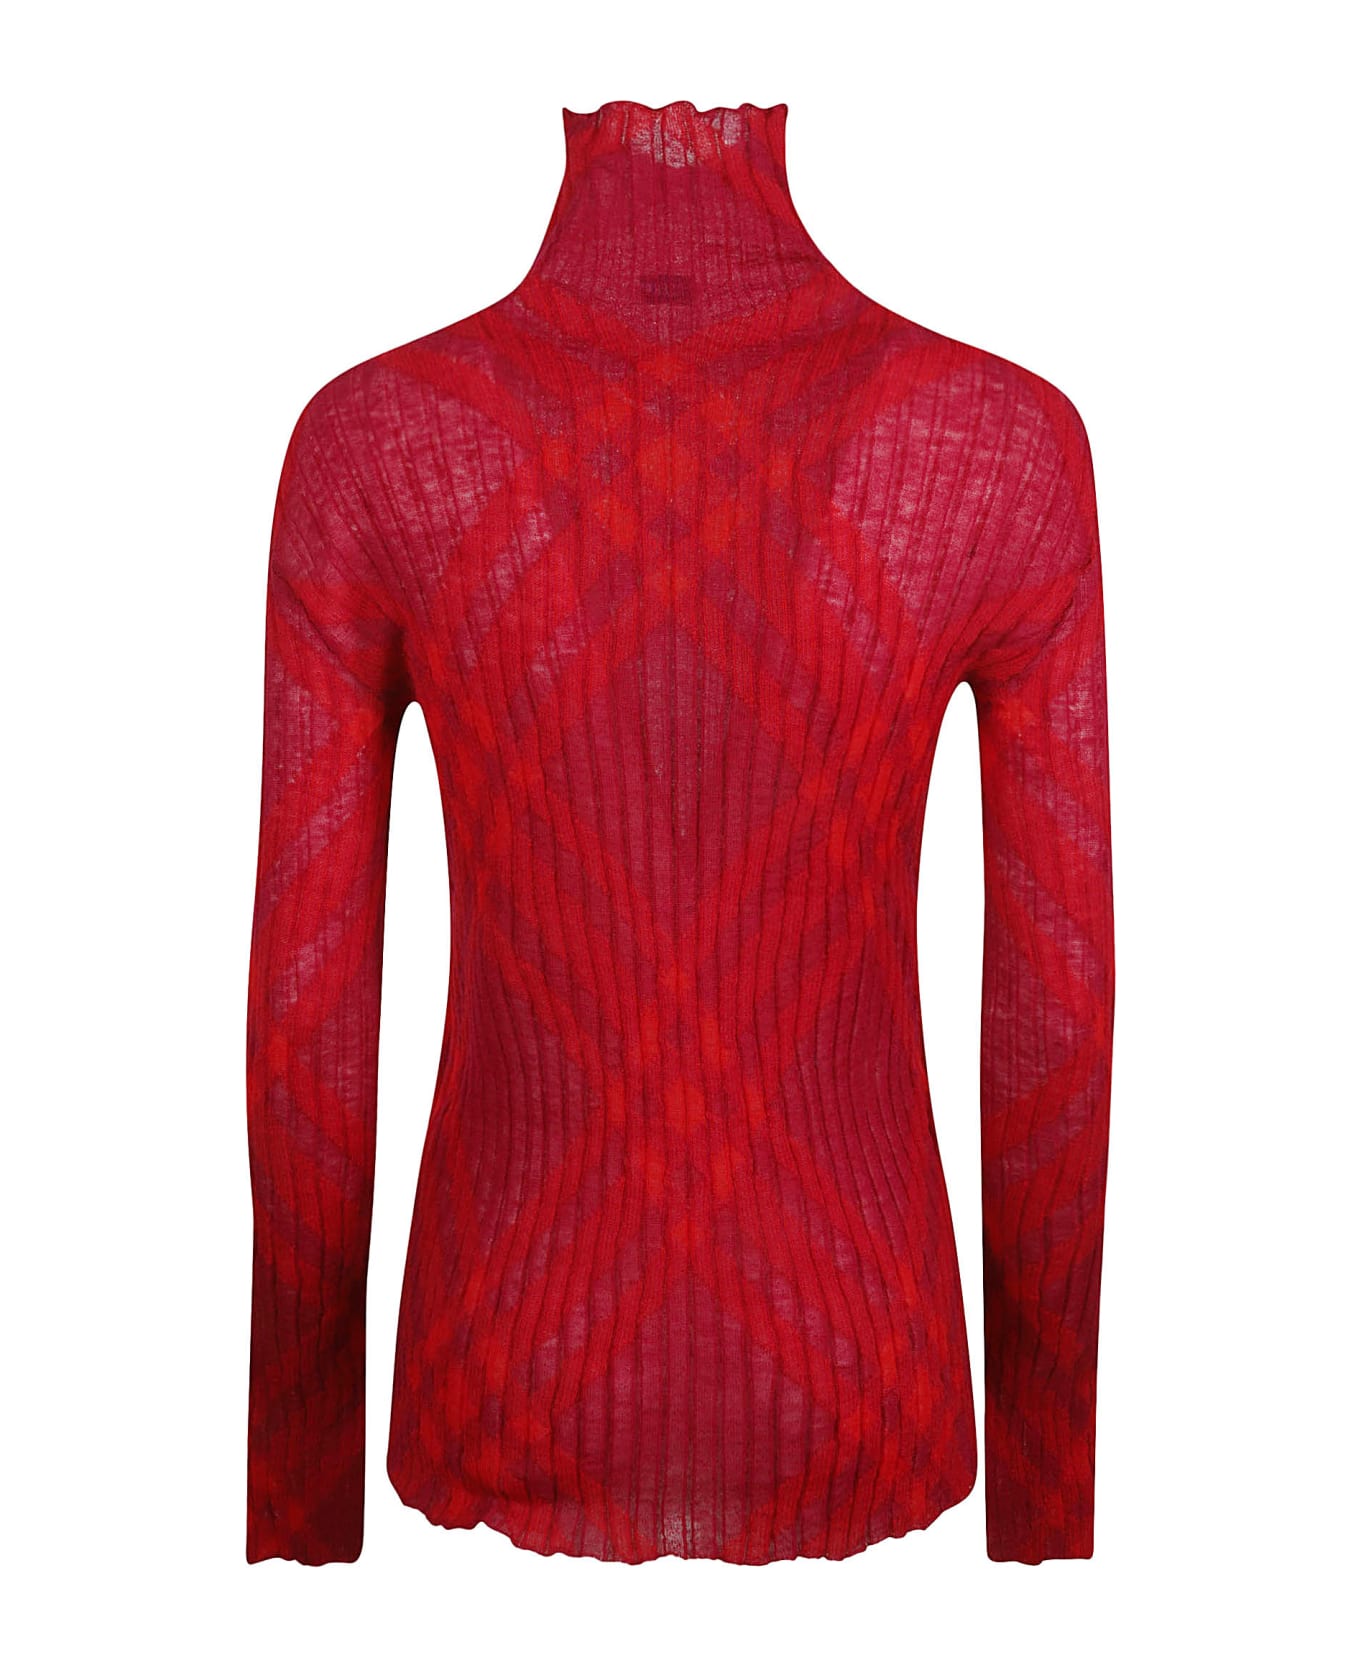 Burberry Ribbed Printed Jumper - Ripple Ip Check